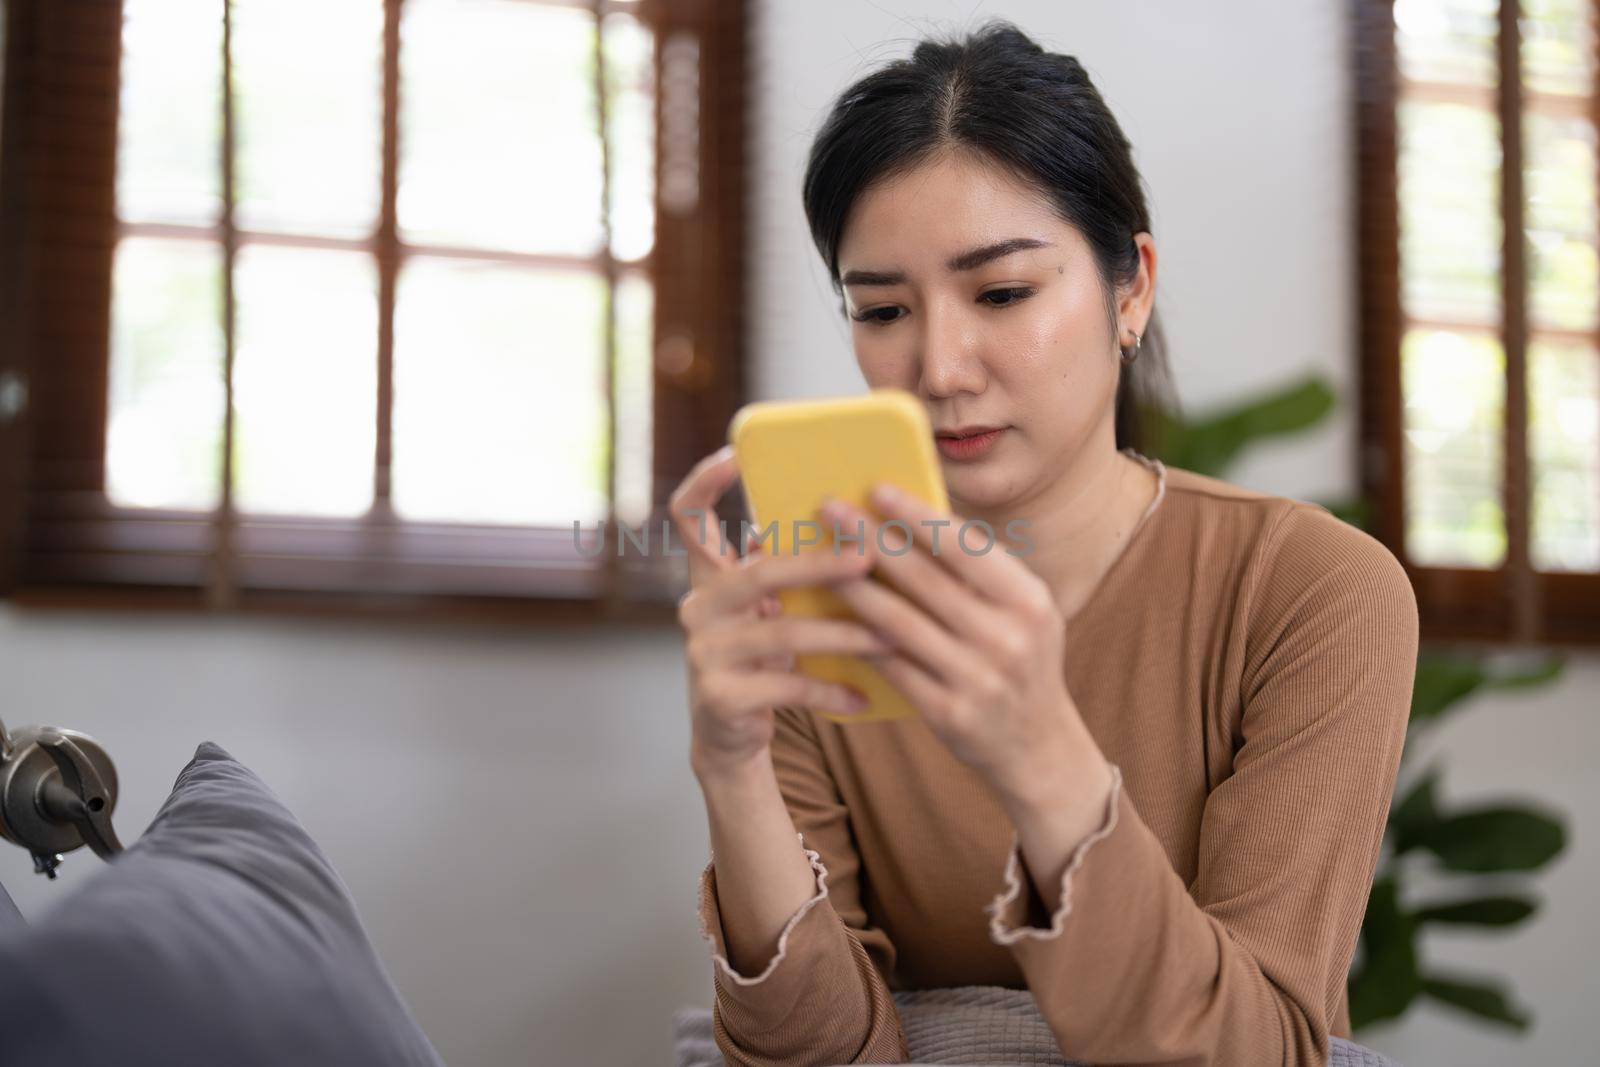 Cropped shot of asian young woman using smart phone at home, messaging or browsing social networks while relaxing on couch.